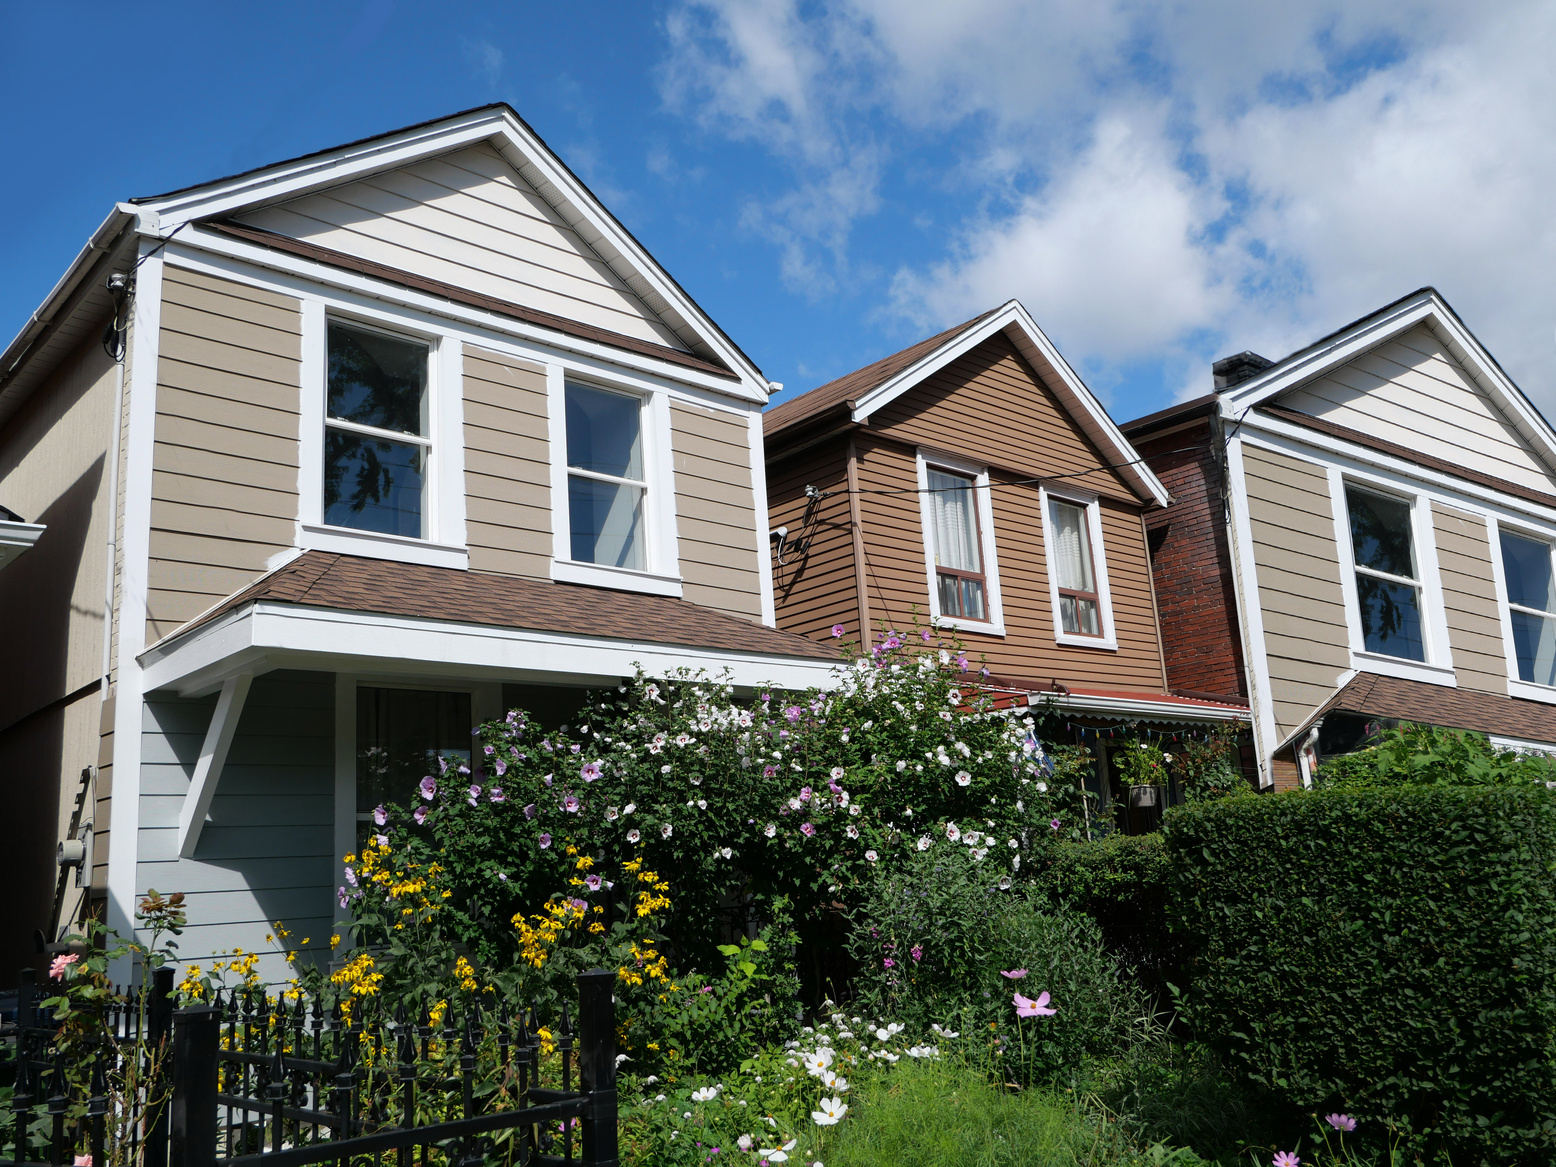 Row of modest clapboard houses with gables and summer flowers in front garden